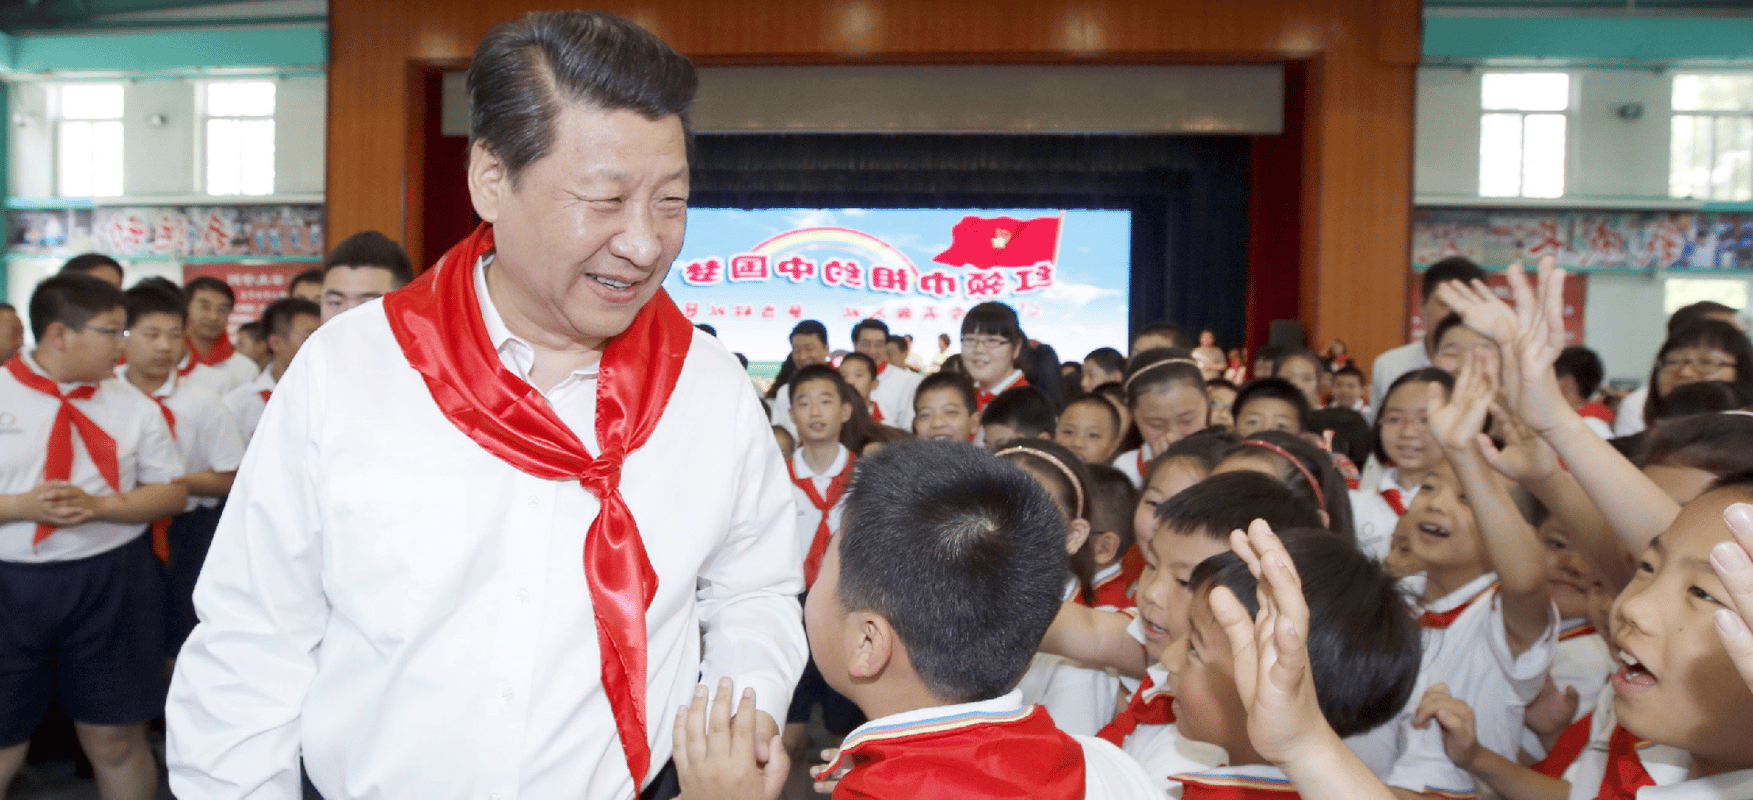 Chinese President Xi Jiping is being welcomed by a large number of students dressed in uniform.